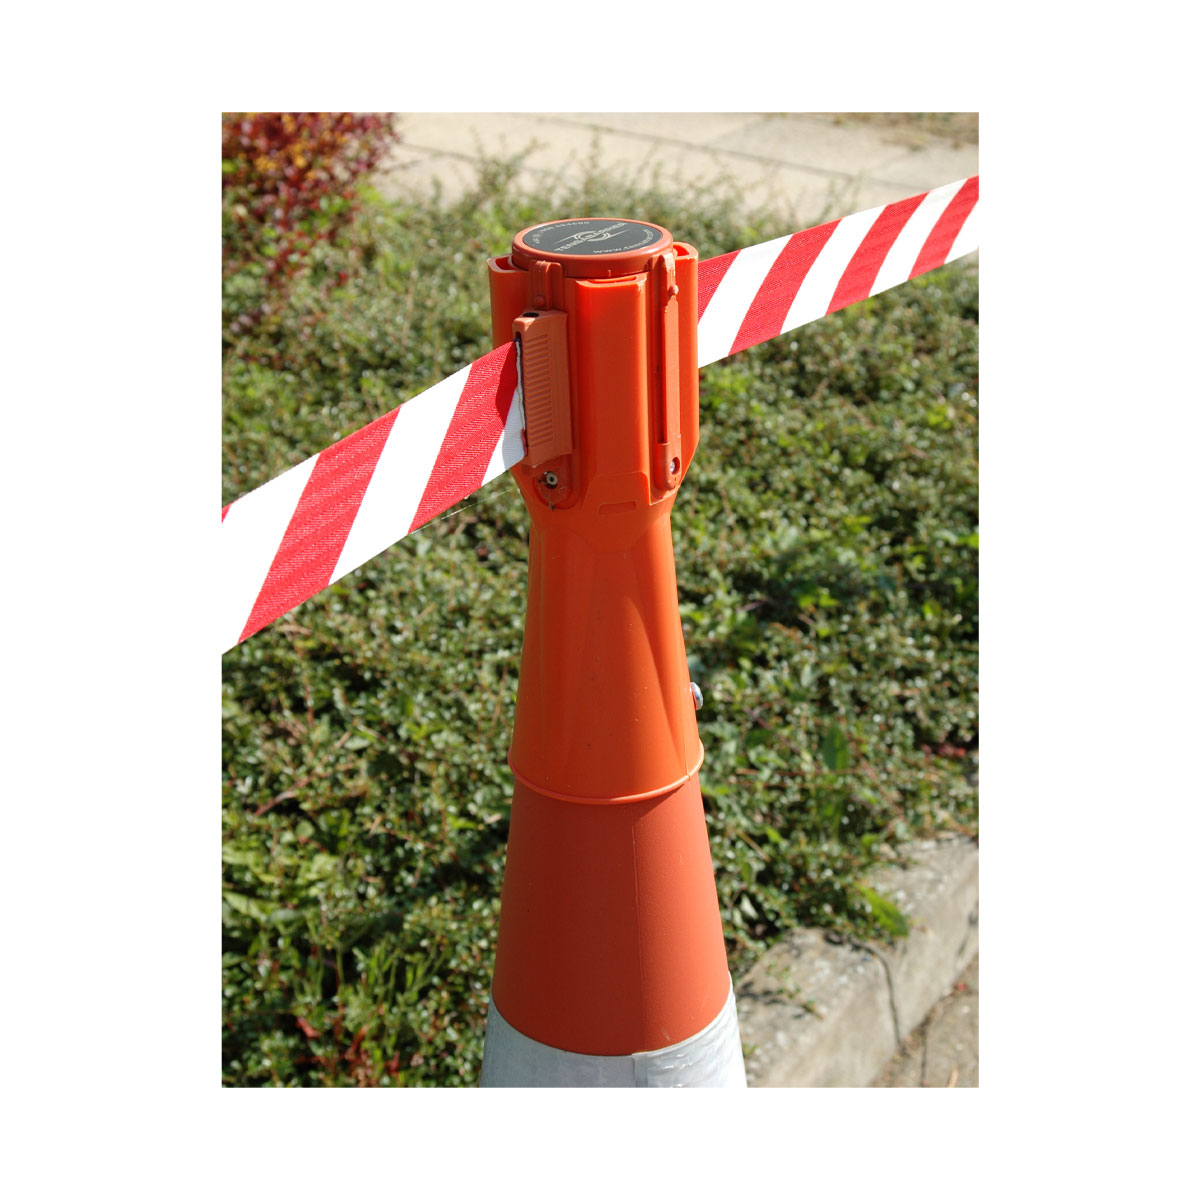 Tensa Traffic Cone Topper Safety Barrier Can be used to Restrict Access & Deployed Quickly And Easily 